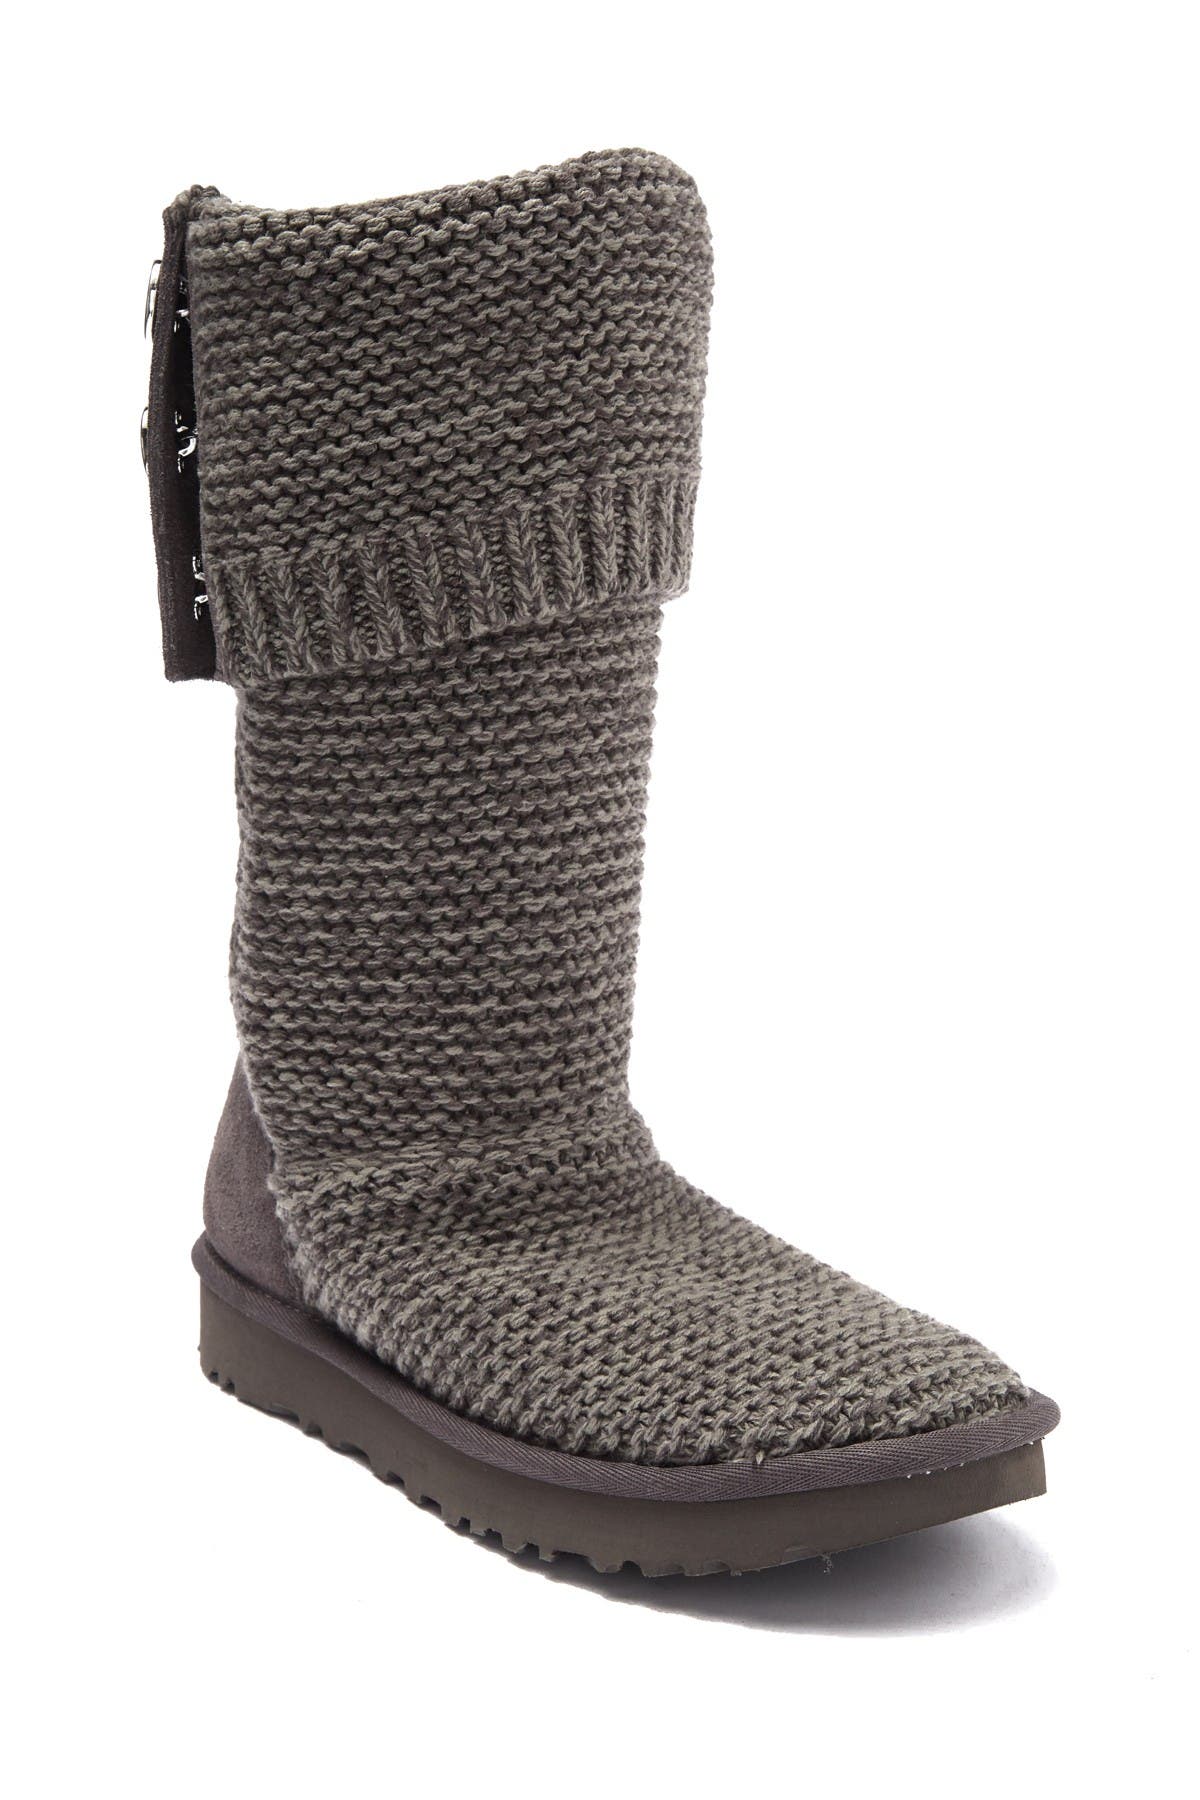 purl cardy knit ugg boots